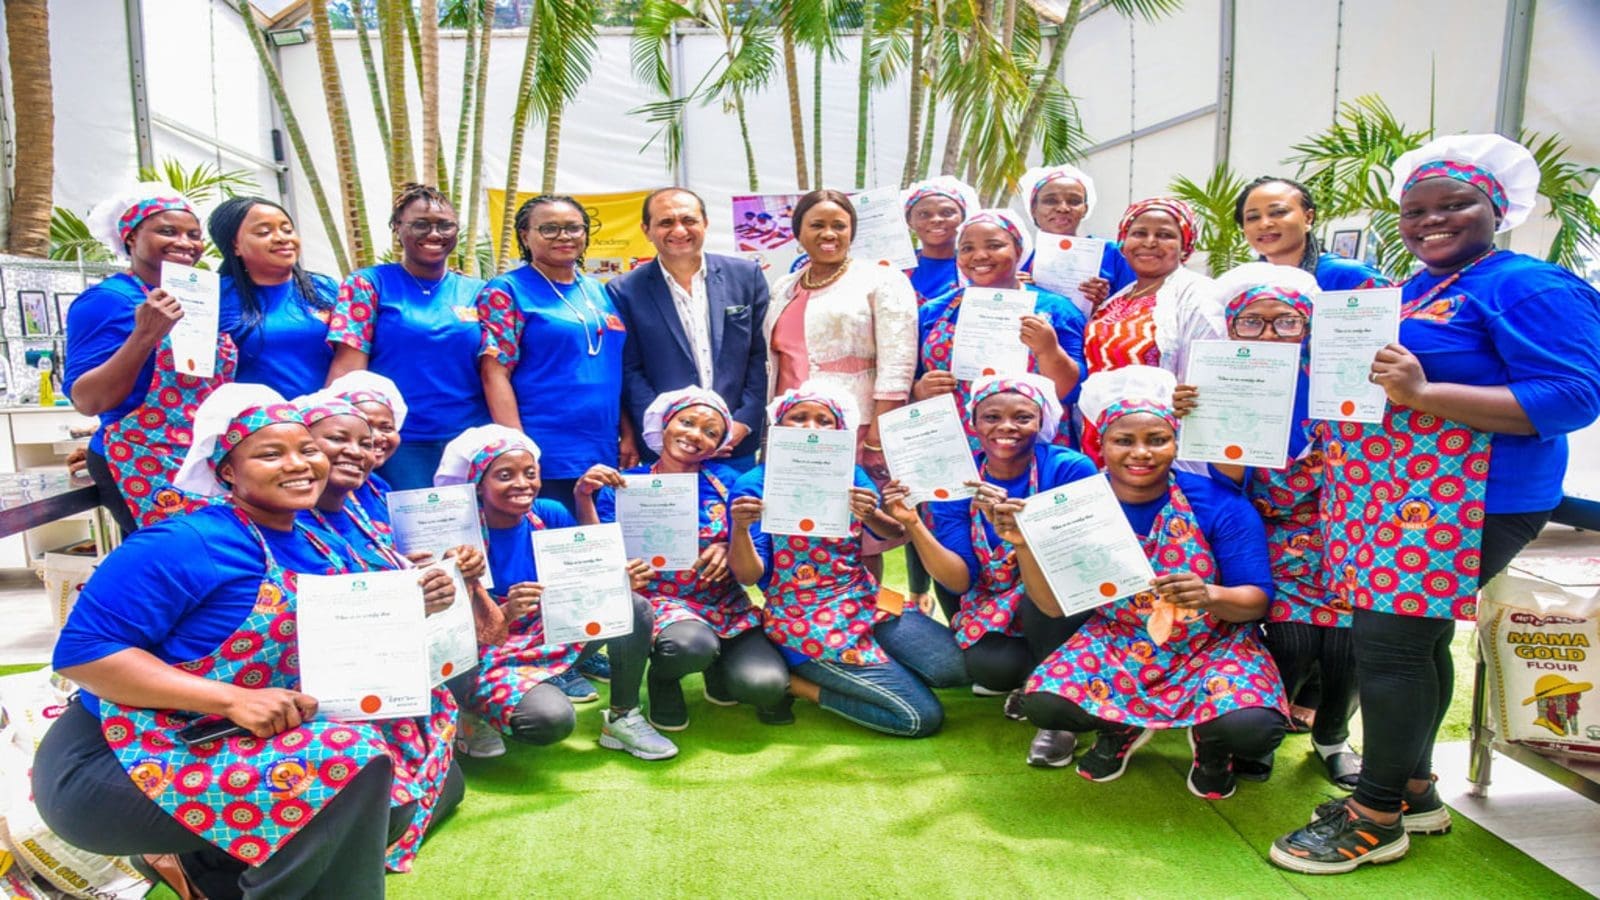 Olam Agri subsidiary Crown Flour Mills launches baking academy to empower Nigerian women